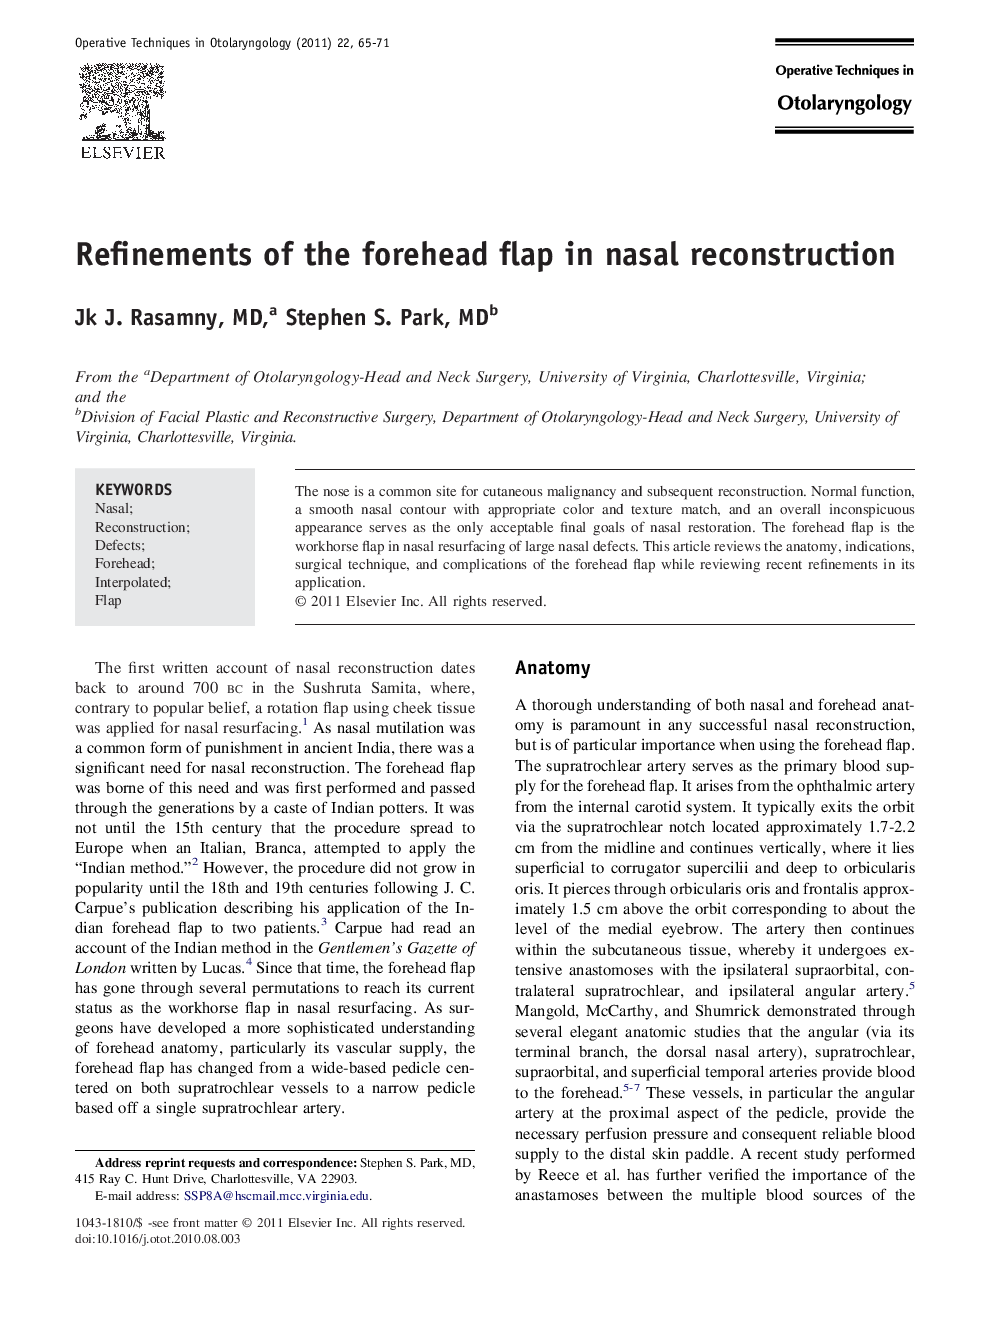 Refinements of the forehead flap in nasal reconstruction